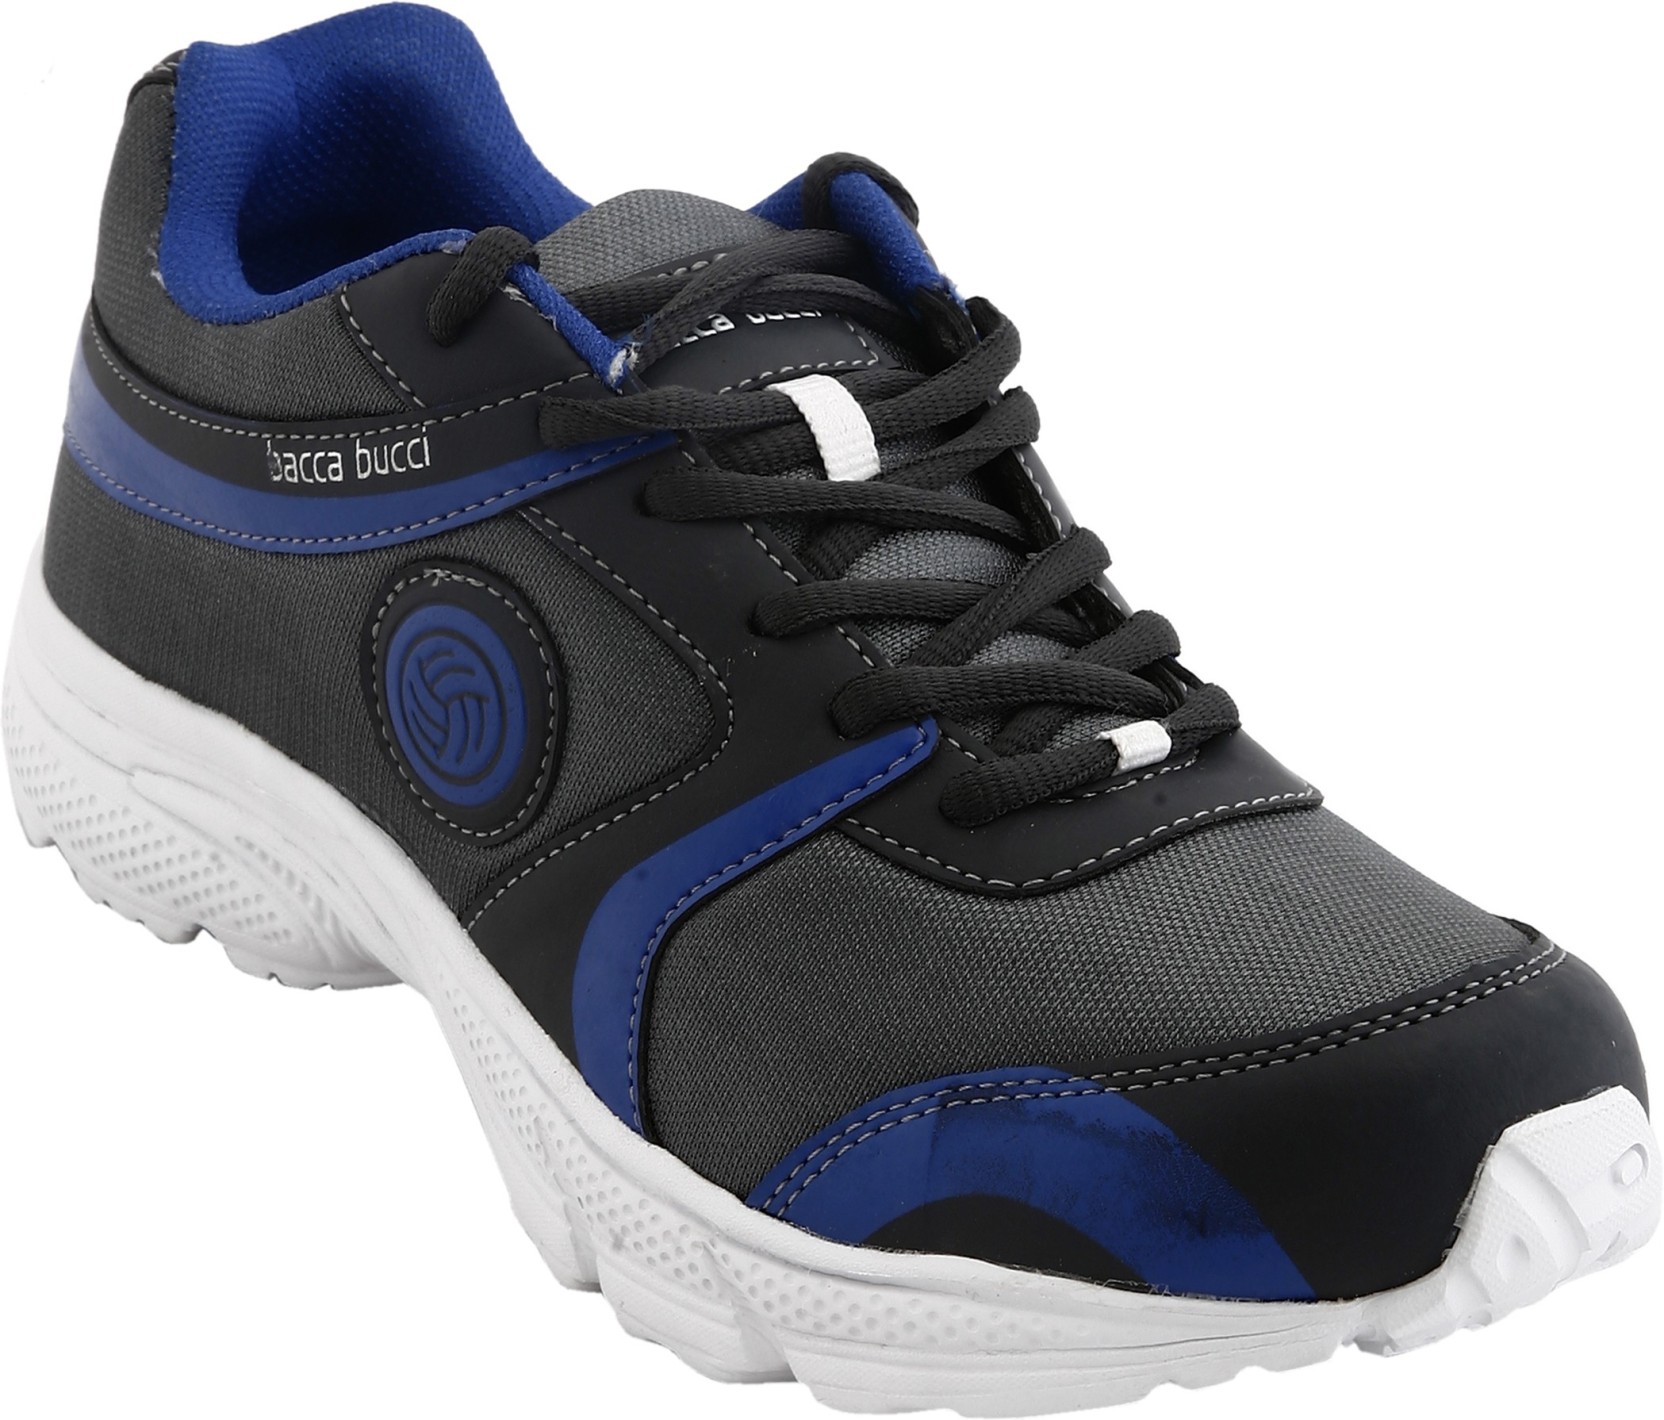 Bacca Bucci Running Shoes - Buy Grey Color Bacca Bucci Running Shoes ...